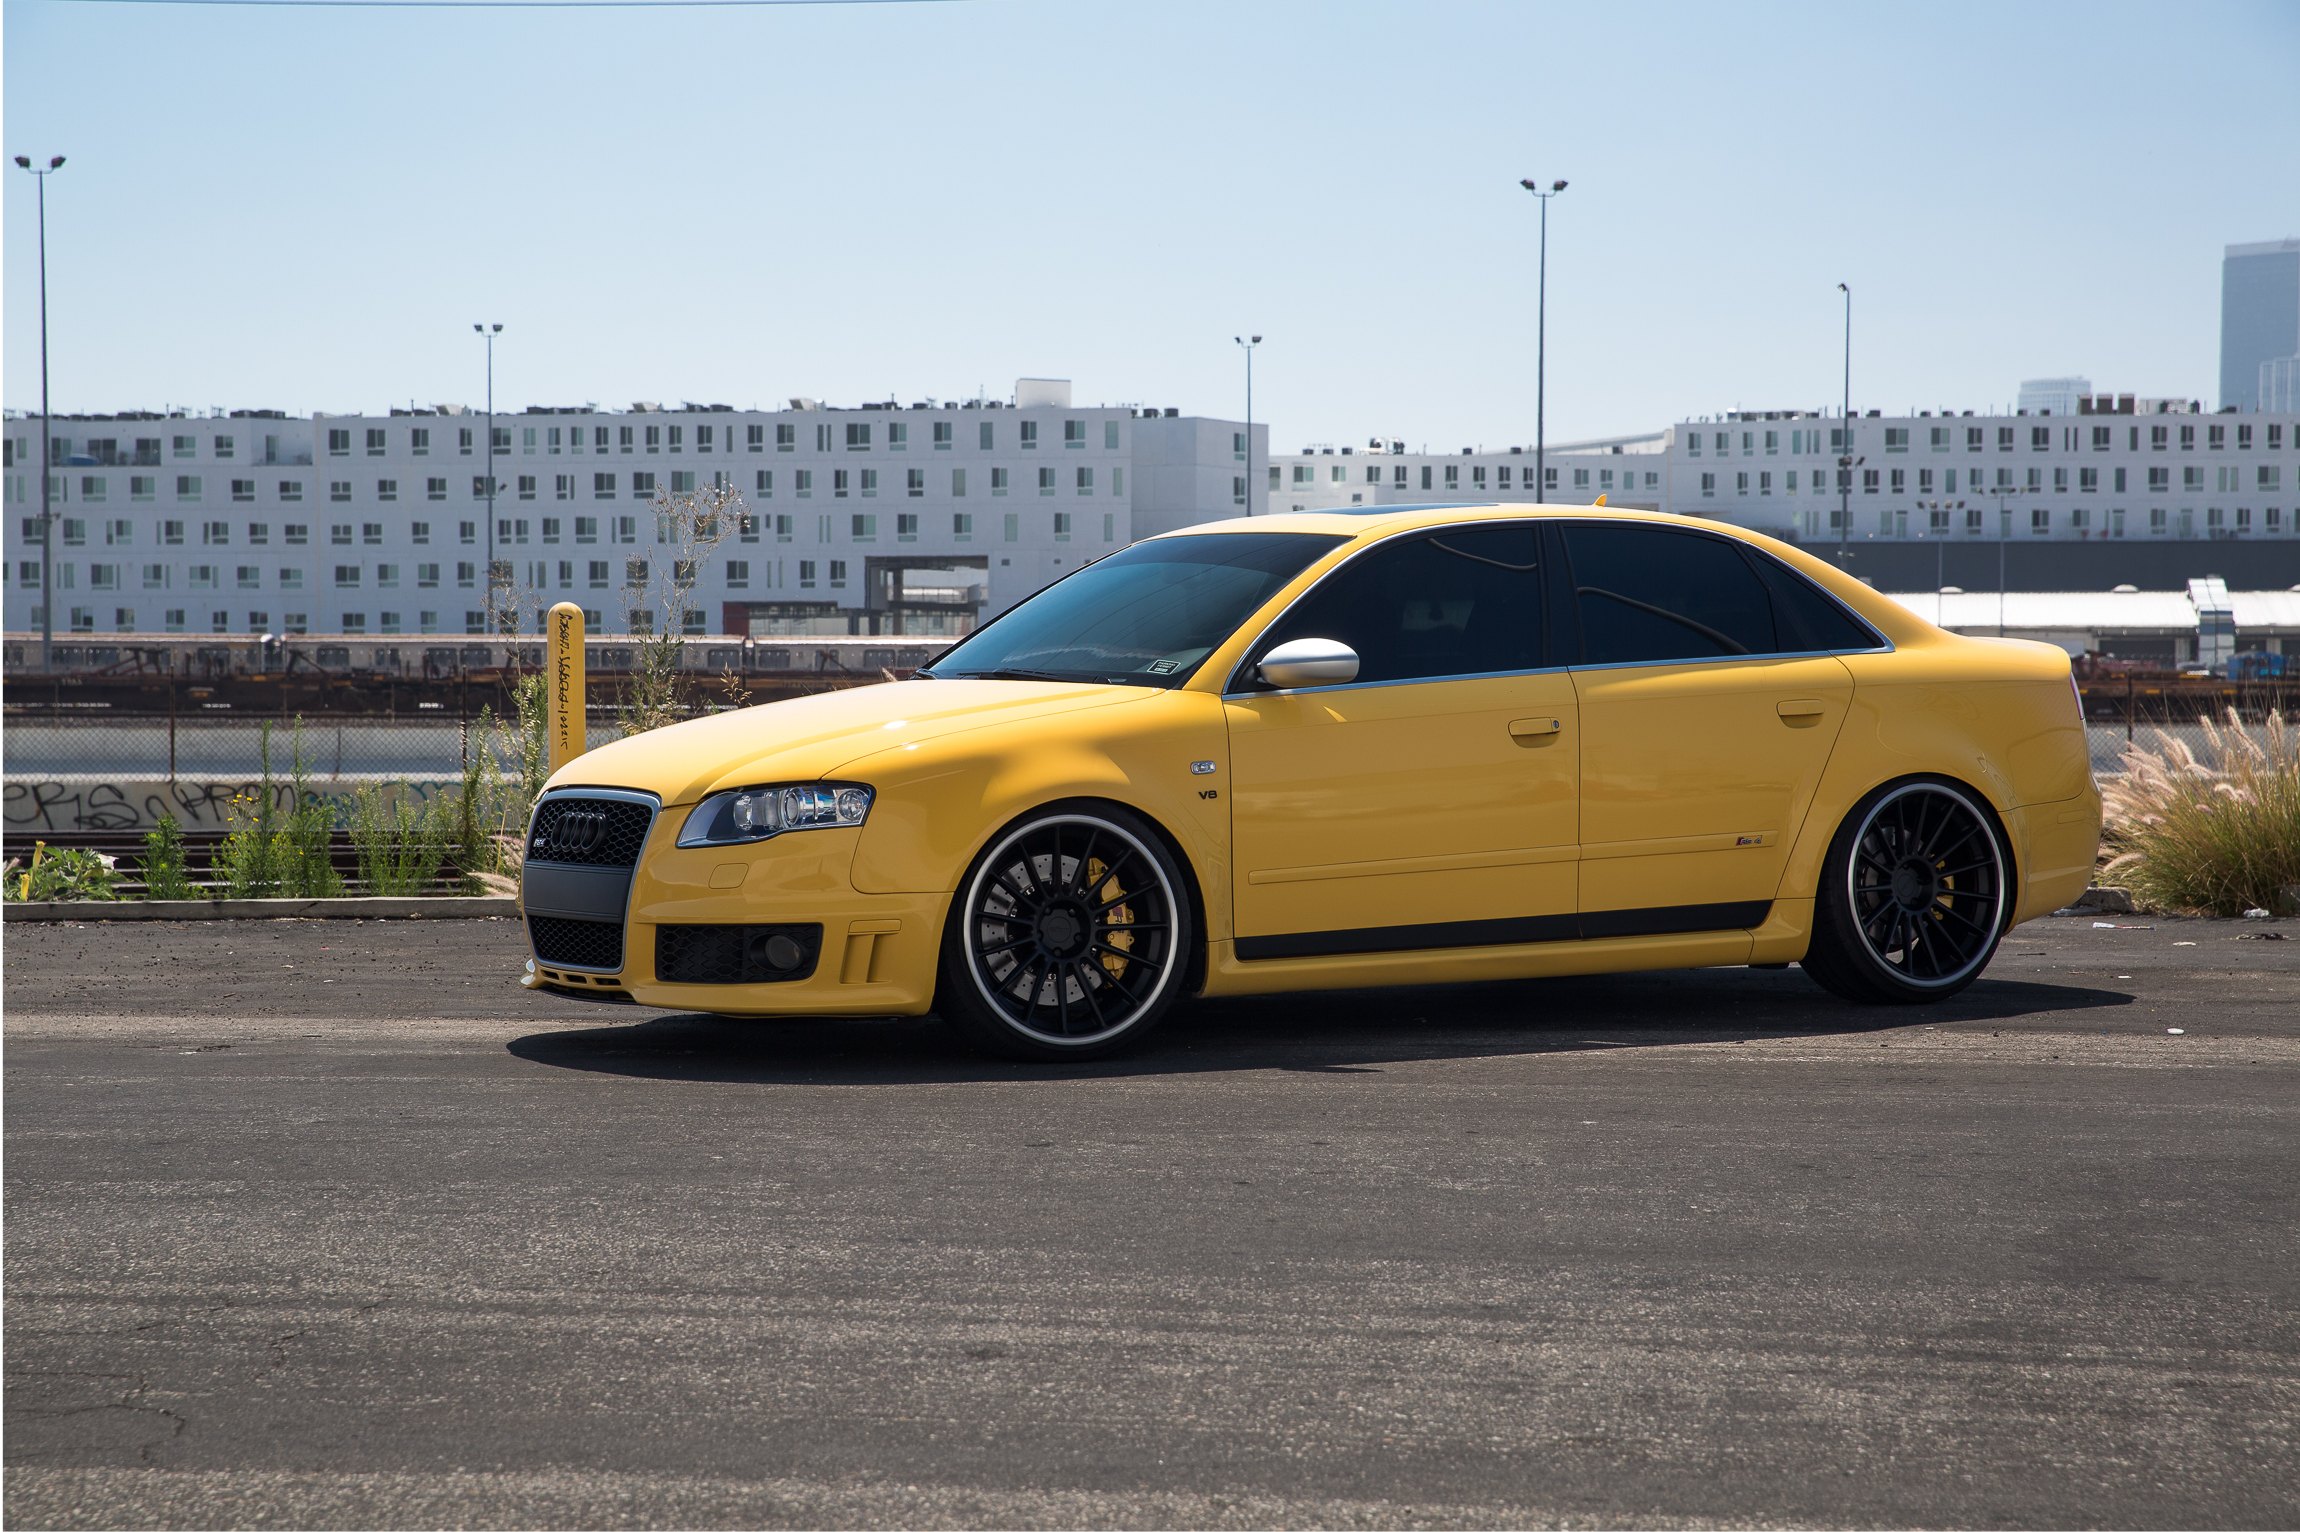 Aftermarket Side Skirts on Yellow Audi S4 V8 - Photo by Rotiform